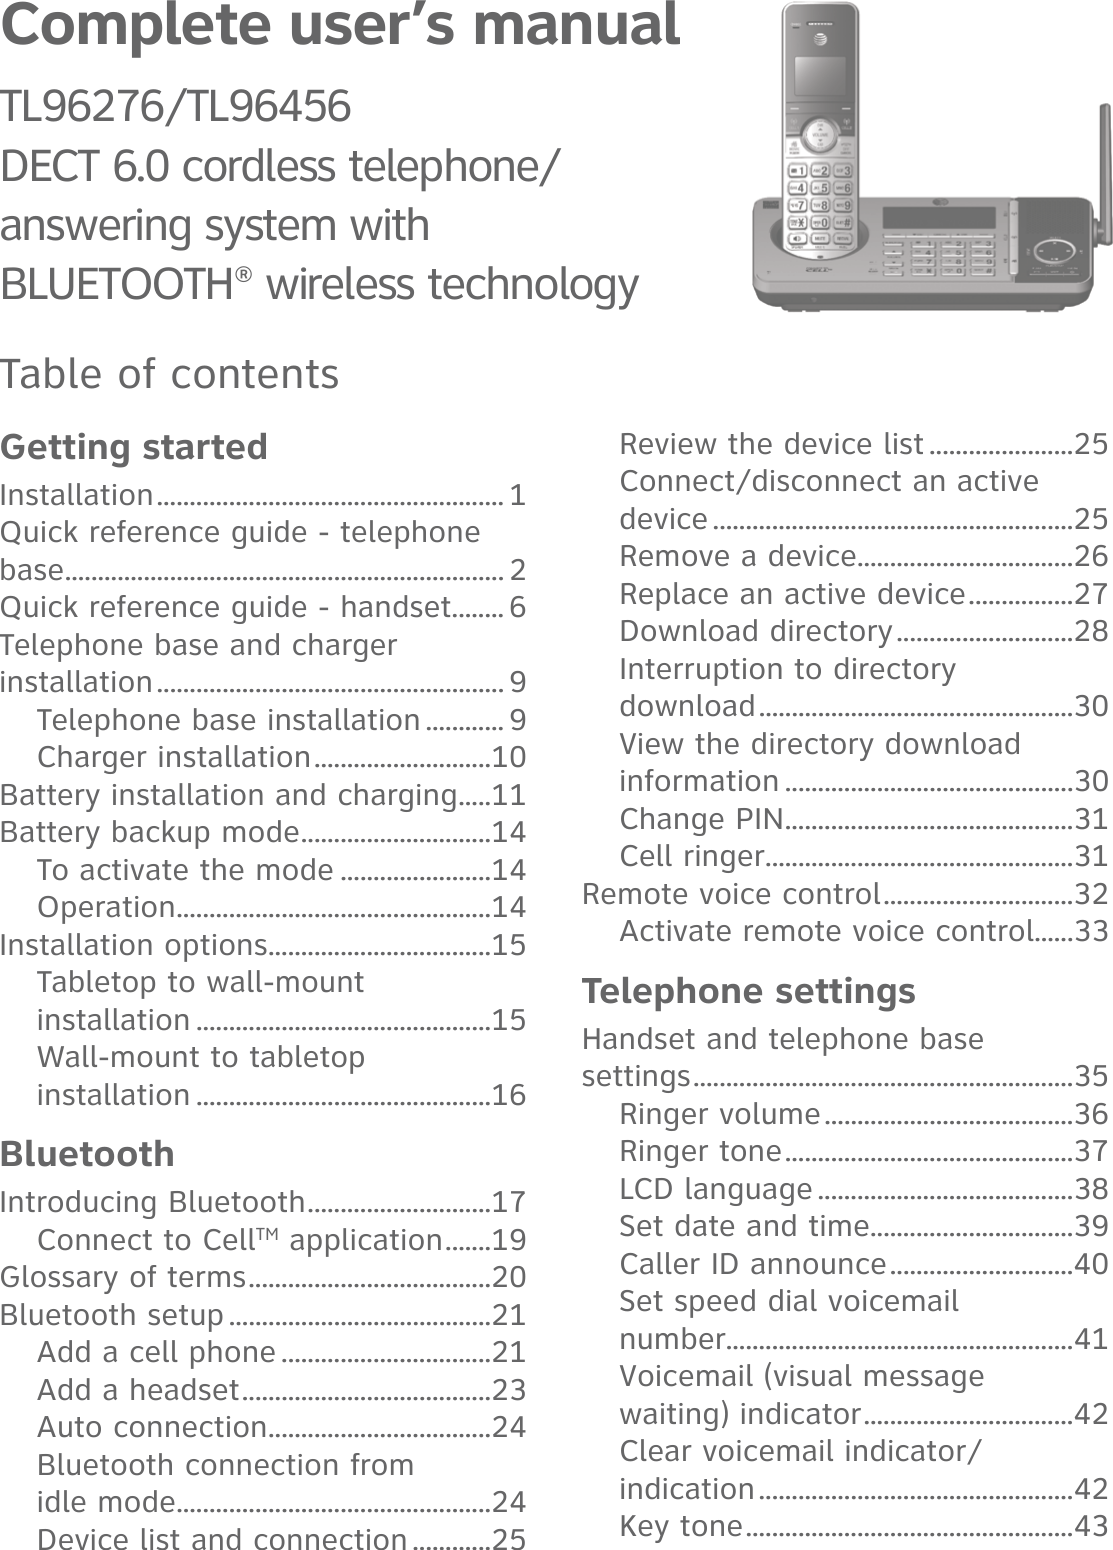 Complete user’s manualTL96276/TL96456 DECT 6.0 cordless telephone/answering system withBLUETOOTH® wireless technologyTable of contentsGetting startedInstallation ..................................................... 1Quick reference guide - telephone base ................................................................... 2Quick reference guide - handset ........ 6Telephone base and charger installation ..................................................... 9Telephone base installation ............ 9Charger installation ...........................10Battery installation and charging .....11Battery backup mode .............................14To activate the mode .......................14Operation ................................................14Installation options ..................................15Tabletop to wall-mount  installation .............................................15Wall-mount to tabletop  installation .............................................16BluetoothIntroducing Bluetooth ............................17Connect to CellTM application .......19Glossary of terms .....................................20Bluetooth setup ........................................21Add a cell phone ................................21Add a headset ......................................23Auto connection ..................................24Bluetooth connection from  idle mode ................................................24Device list and connection ............25Review the device list ......................25Connect/disconnect an active device .......................................................25Remove a device .................................26Replace an active device ................27Download directory ...........................28Interruption to directory  download ................................................30View the directory download information ............................................30Change PIN ............................................31Cell ringer ...............................................31Remote voice control .............................32Activate remote voice control......33Telephone settingsHandset and telephone base  settings ..........................................................35Ringer volume ......................................36Ringer tone ............................................37LCD language .......................................38Set date and time ...............................39Caller ID announce ............................40Set speed dial voicemail  number.....................................................41Voicemail (visual message  waiting) indicator ................................42Clear voicemail indicator/ indication ................................................42Key tone ..................................................43